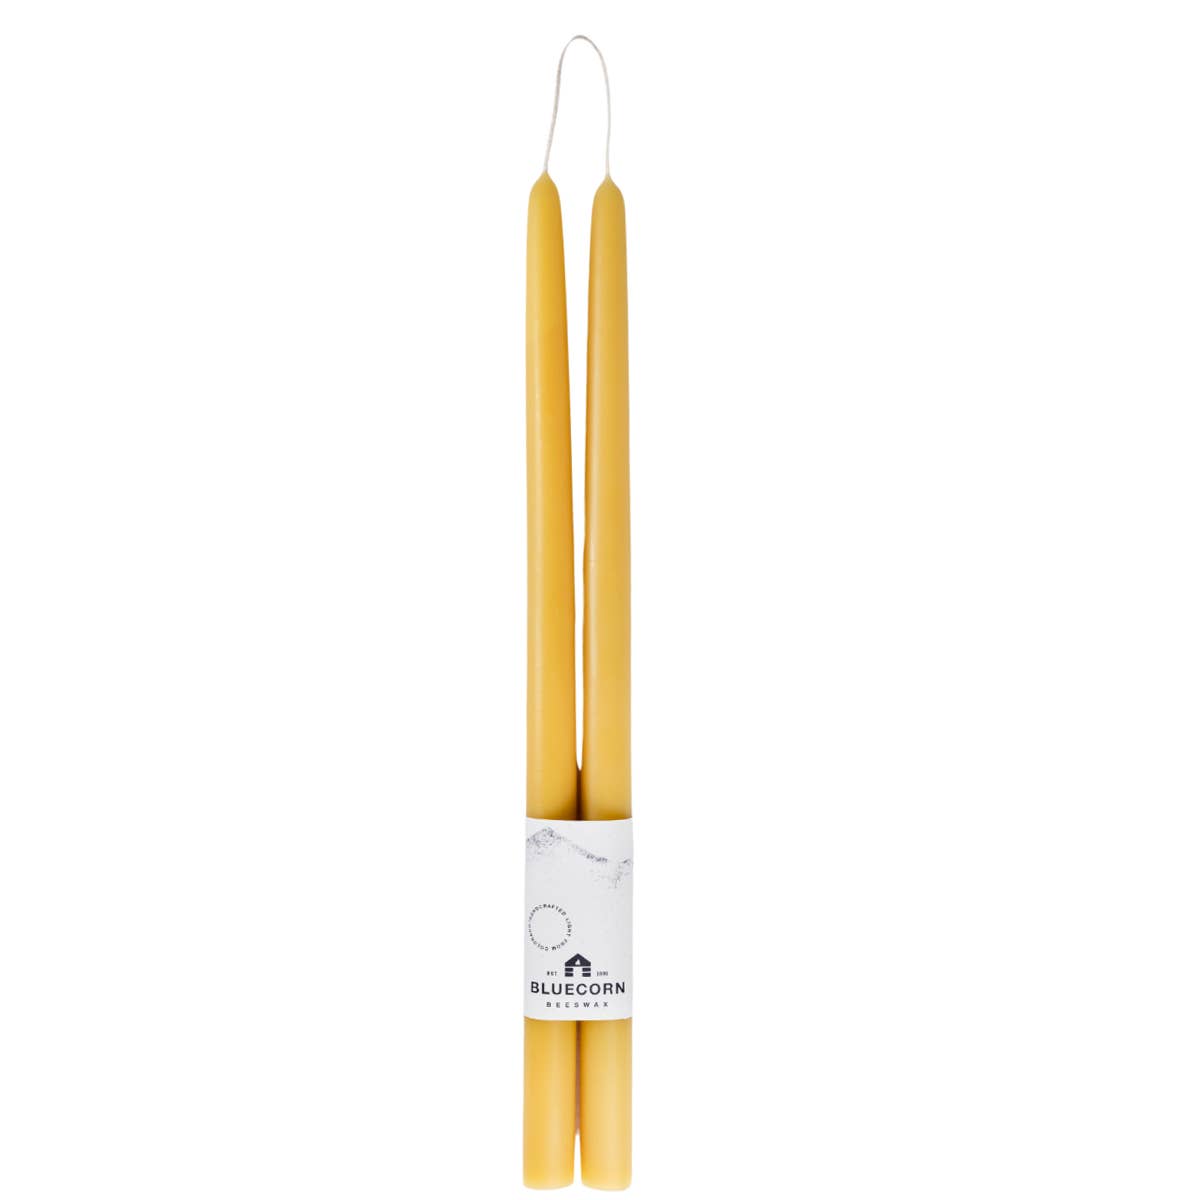 Pair of Hand-Dipped Beeswax Taper Candles